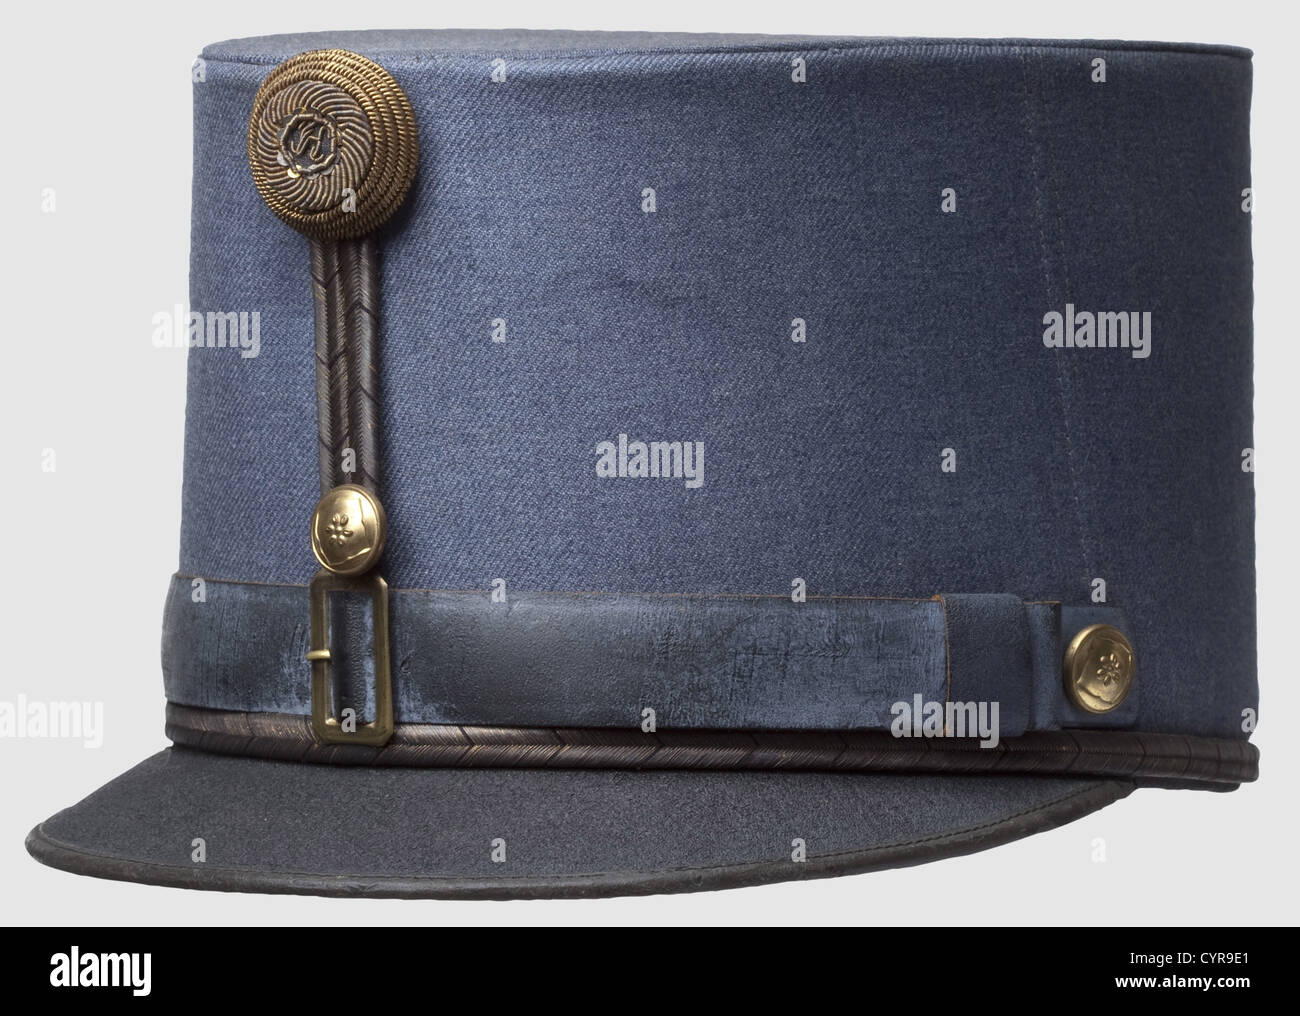 A pike-grey officer's cap for generals,of the imperial royal army Worsted yarn with leather peak and chin strap,the golden lace and sling darkened. Golden buttons in generals' design. The rose with 'K' for Kaiser Karl. Fine leather sweatband,black silk lining,golden manufacturer's name inside 'Tiller Wien - K.u.K. Hoflieferant - Manöverkappe'(Tiller Vienna - imperial-royal purveyor to the court - manoeuvre cap). The cover with a moth hole,the lacquer of the peak crazed,except for that in beautiful condition,historic,historical,1910s,20th century,19t,Additional-Rights-Clearences-Not Available Stock Photo